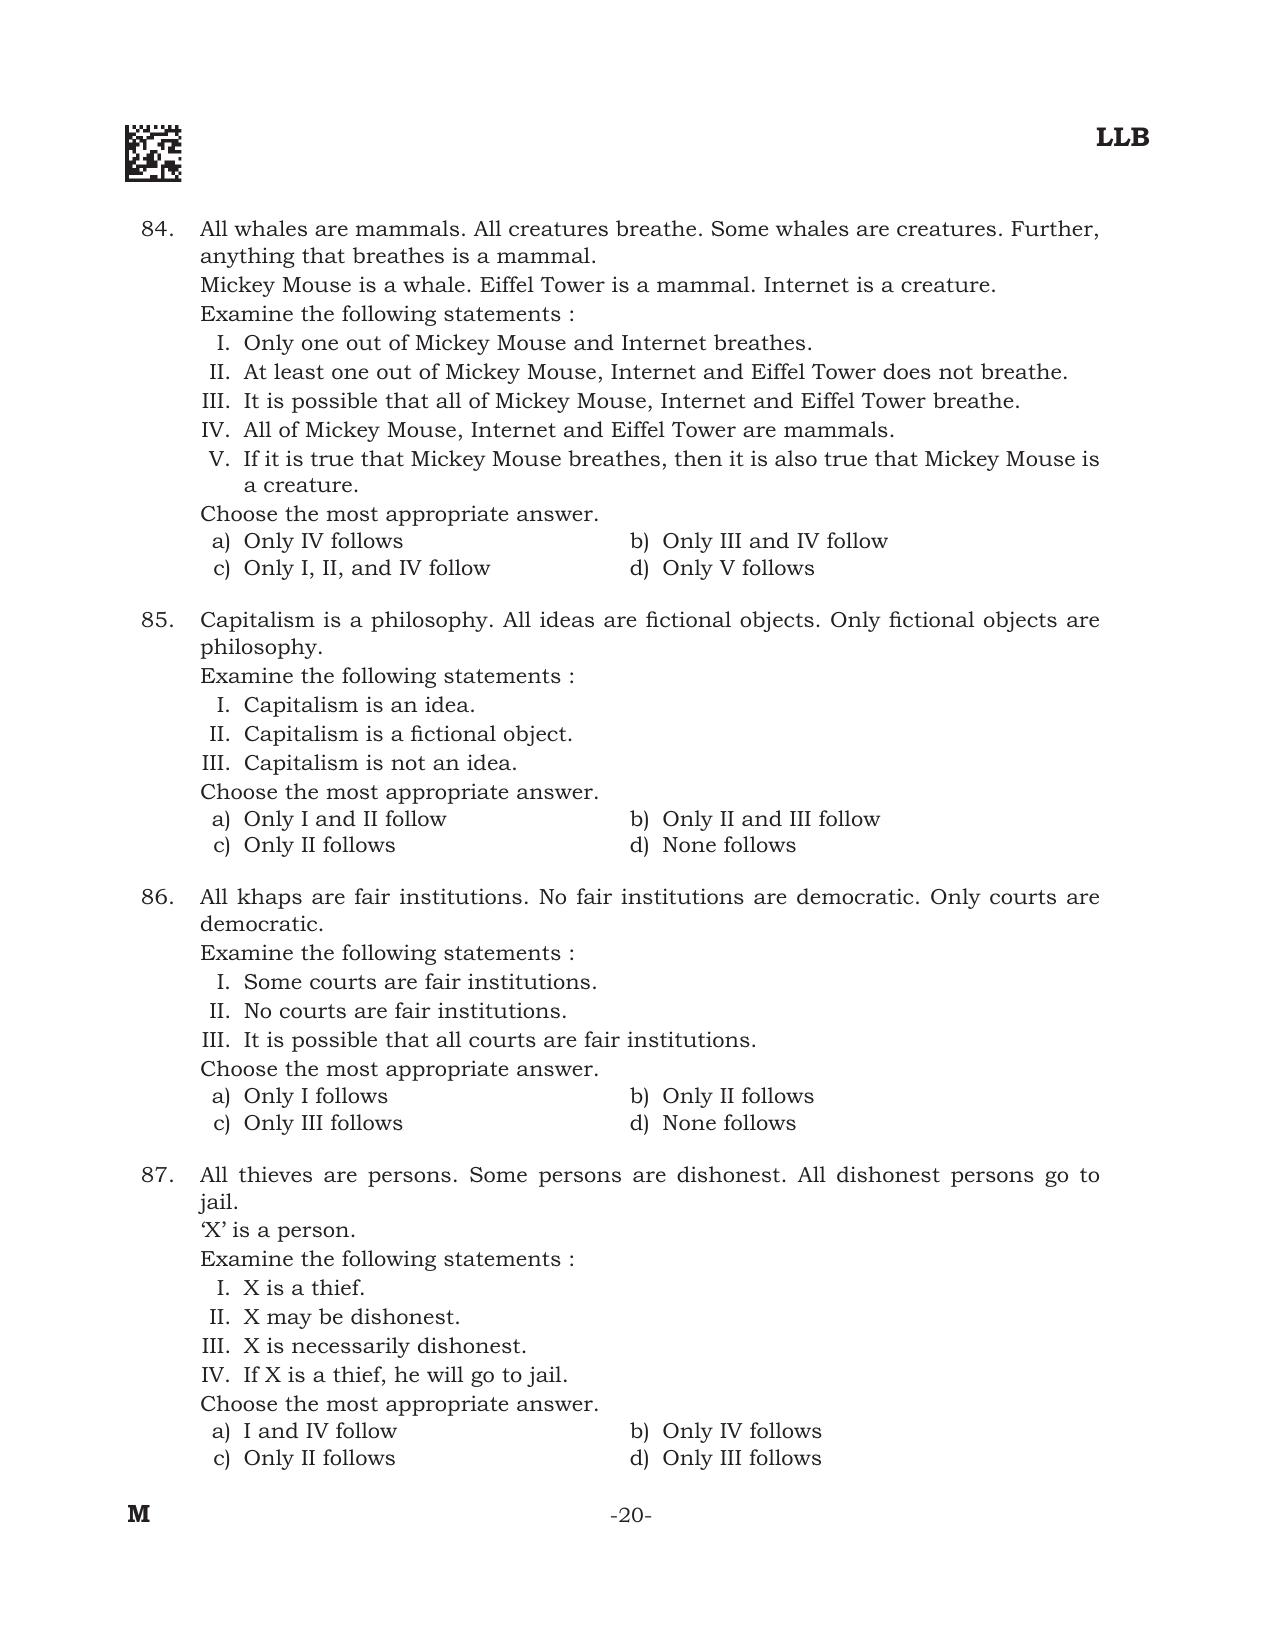 AILET 2022 Question Paper for BA LLB - Page 20